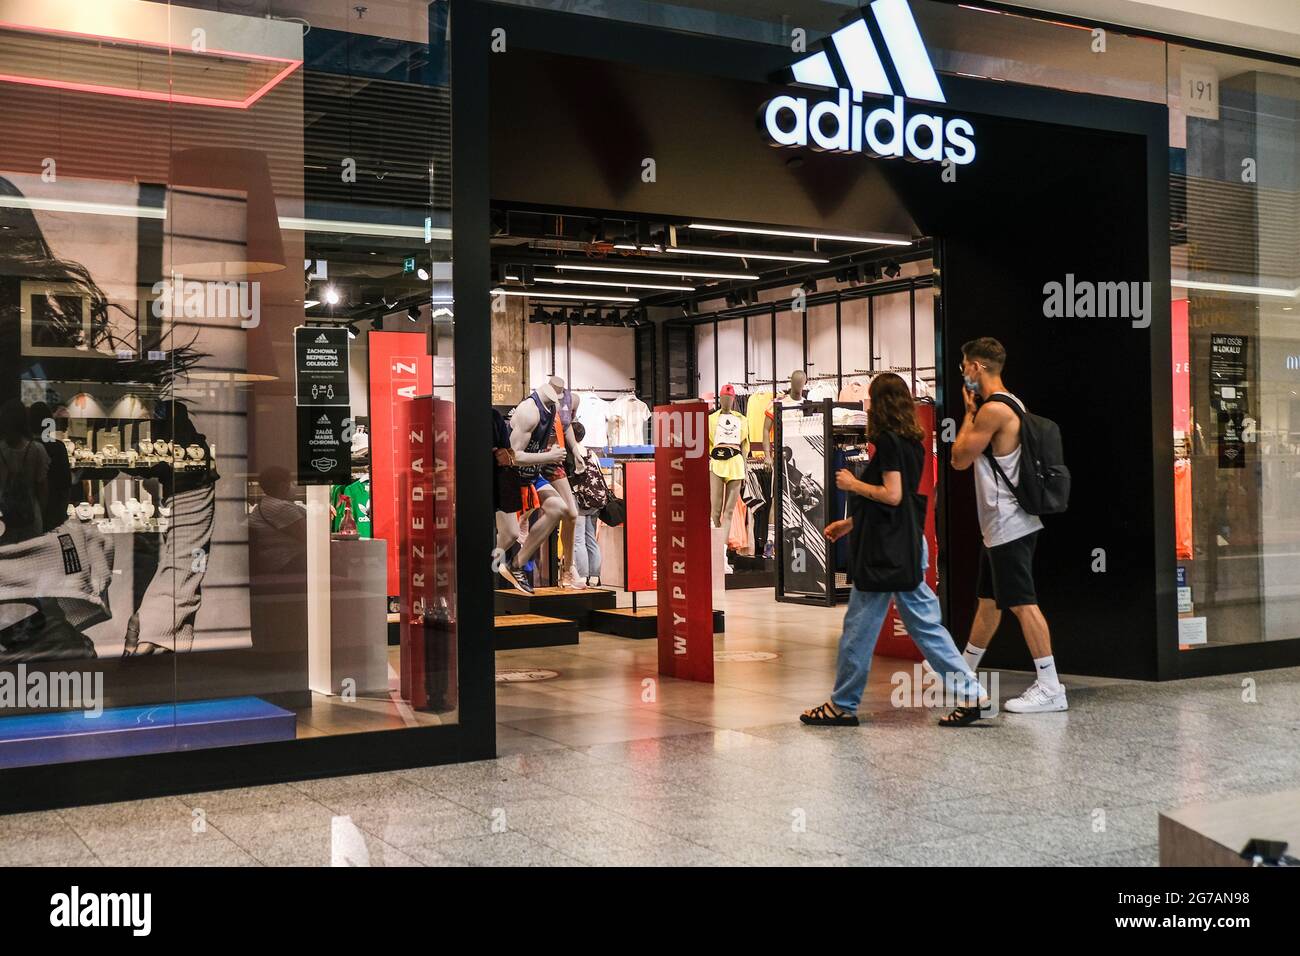 Krakow, Poland. 12th July, 2021. People seen entering an Adidas shop inside a shopping mall. (Photo by Omar Images/Sipa USA) Credit: Sipa USA/Alamy Live News Stock Photo - Alamy